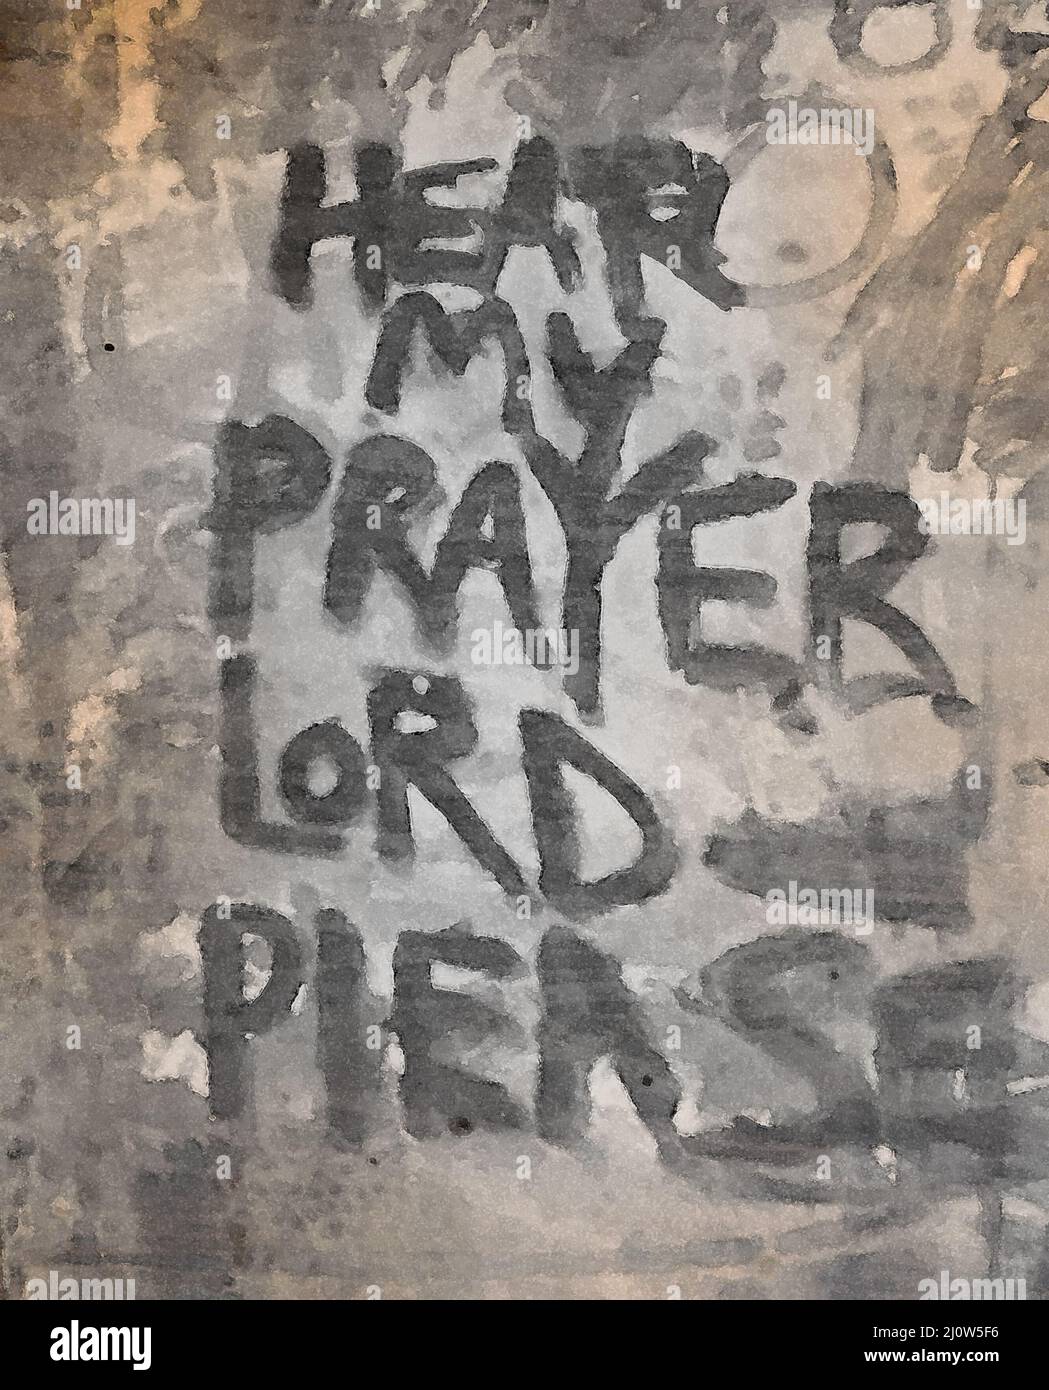 Abstract graffiti art that says Hear My Prayer Lord Please.  Image is made of smeared lettering with black smudges and brown discoloration. Stock Photo